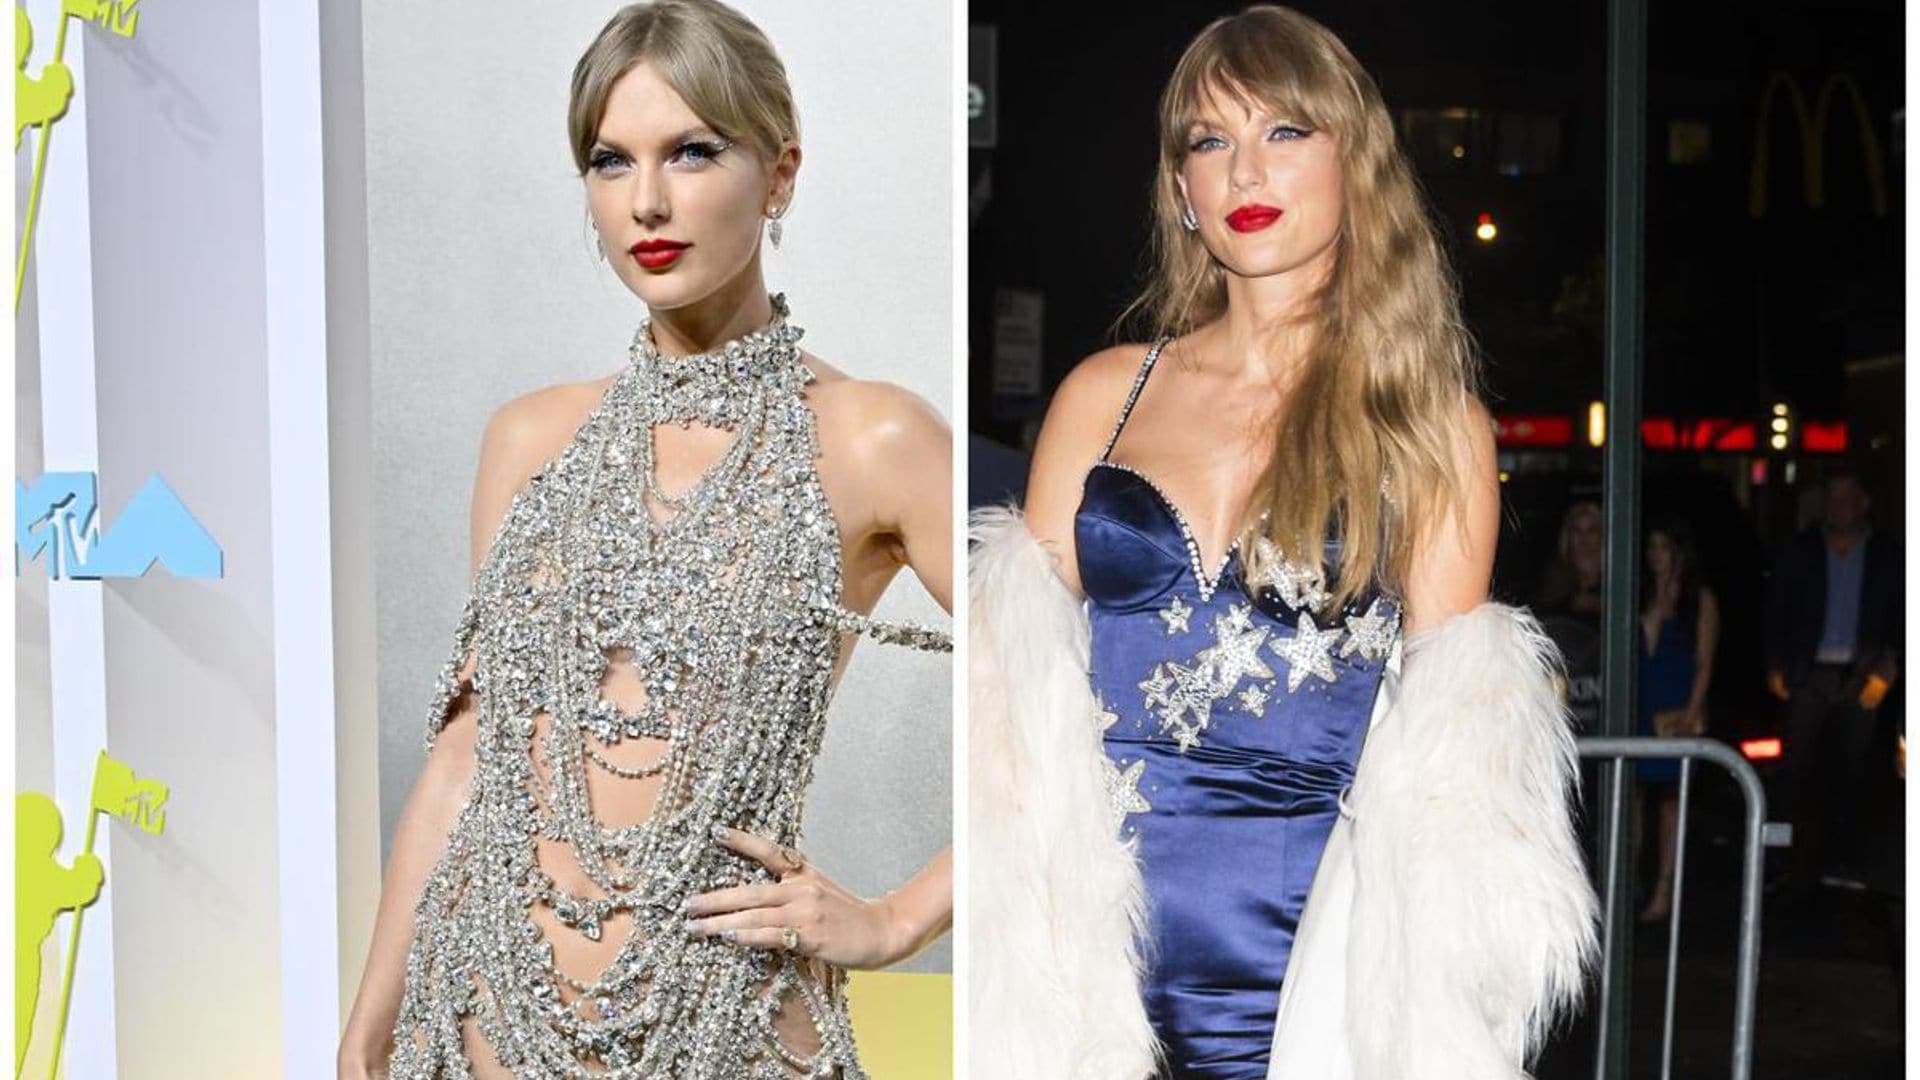 Taylor Swift shimmers in starry outfit inspired by new album ‘Midnights’